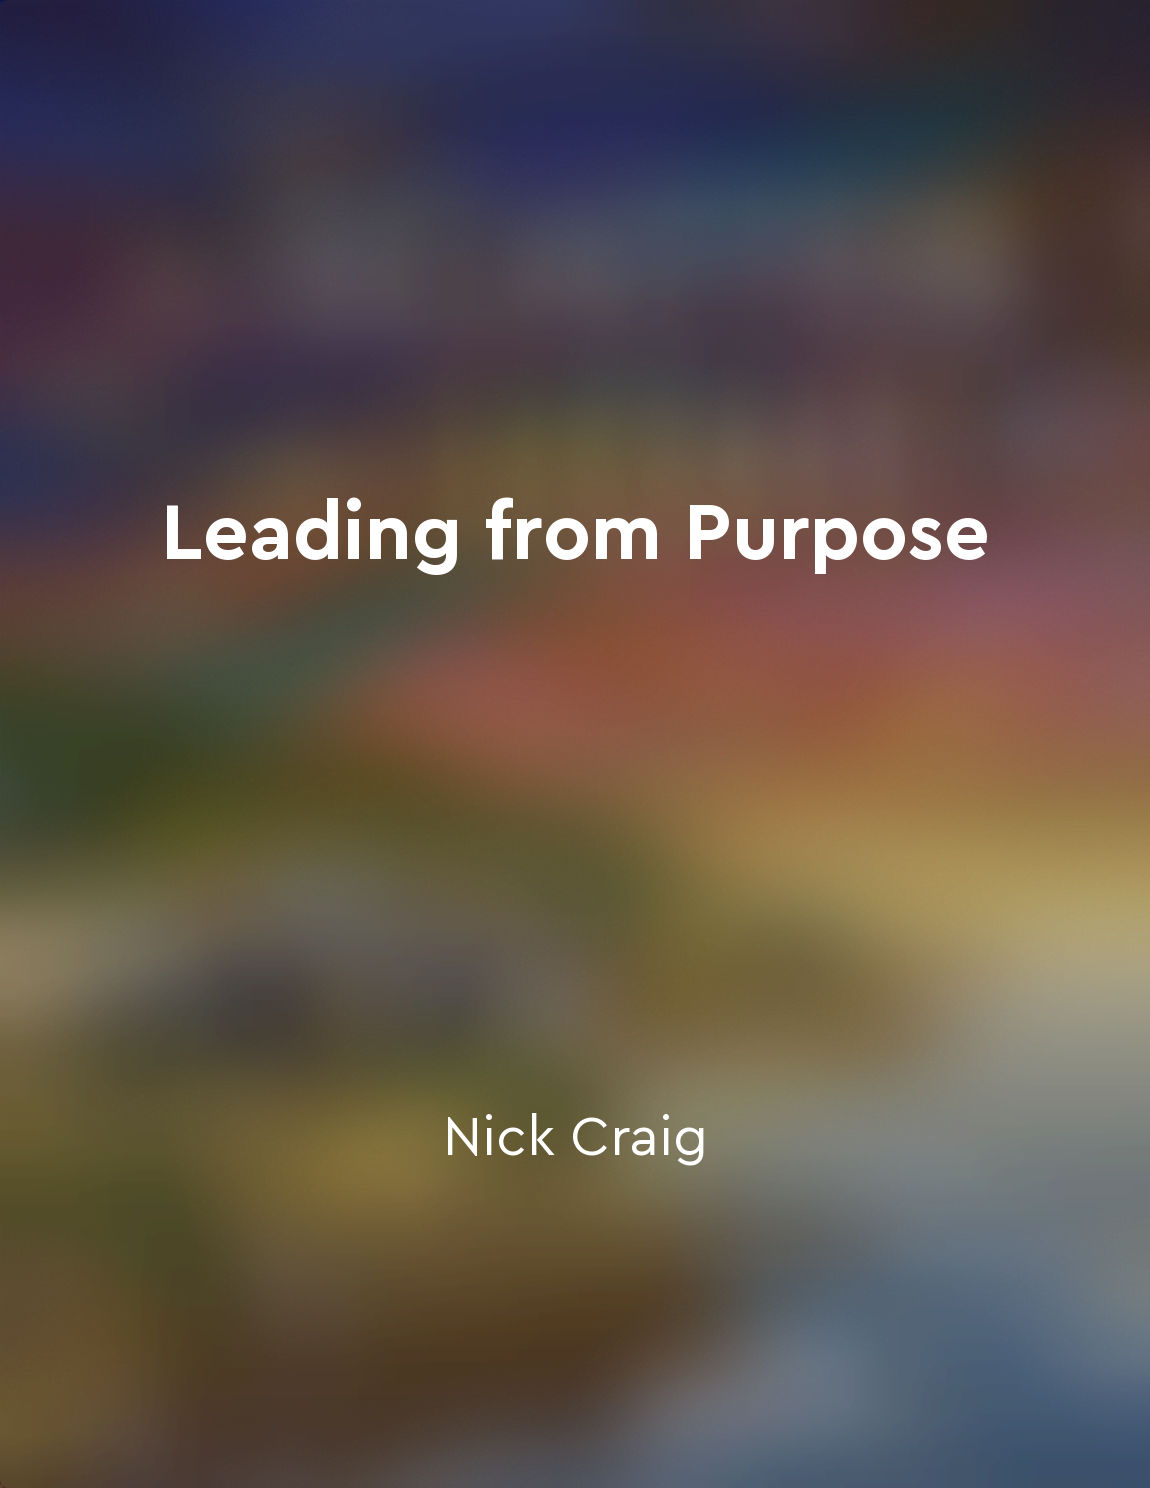 Living with purpose empowers individuals to make a difference